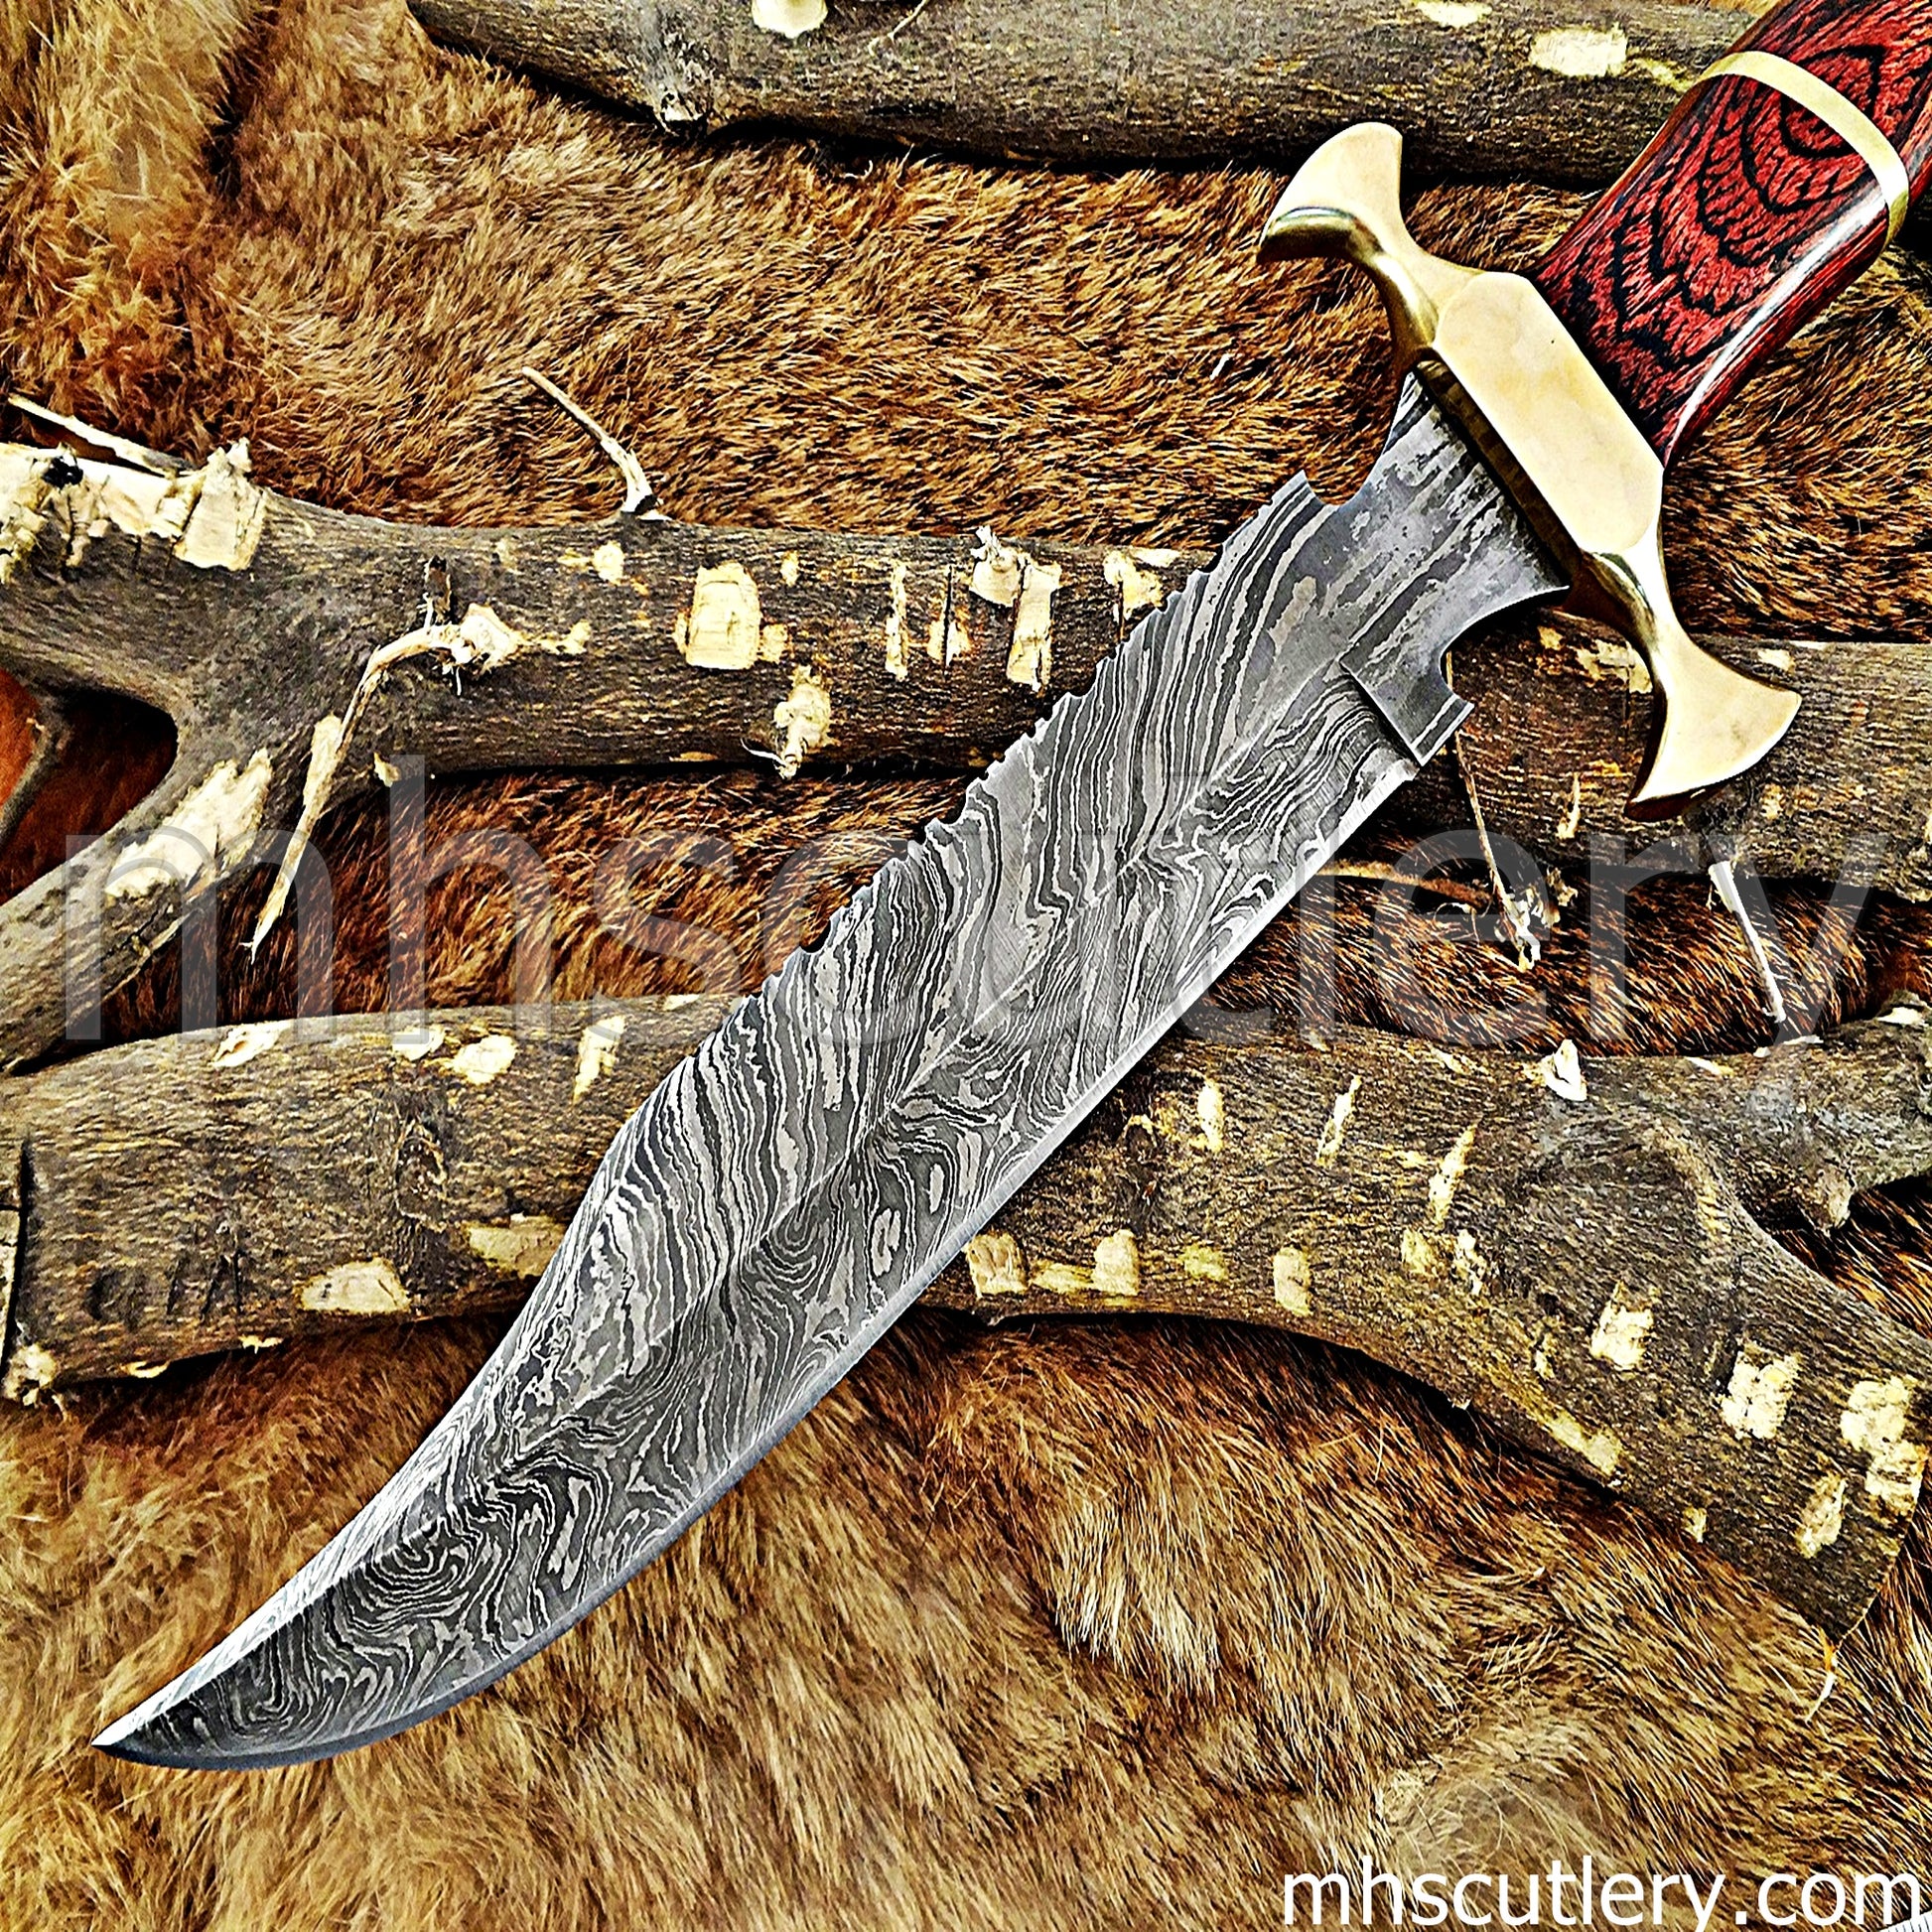 Damascus Steel Bowie Knife / Red Handle | mhscutlery